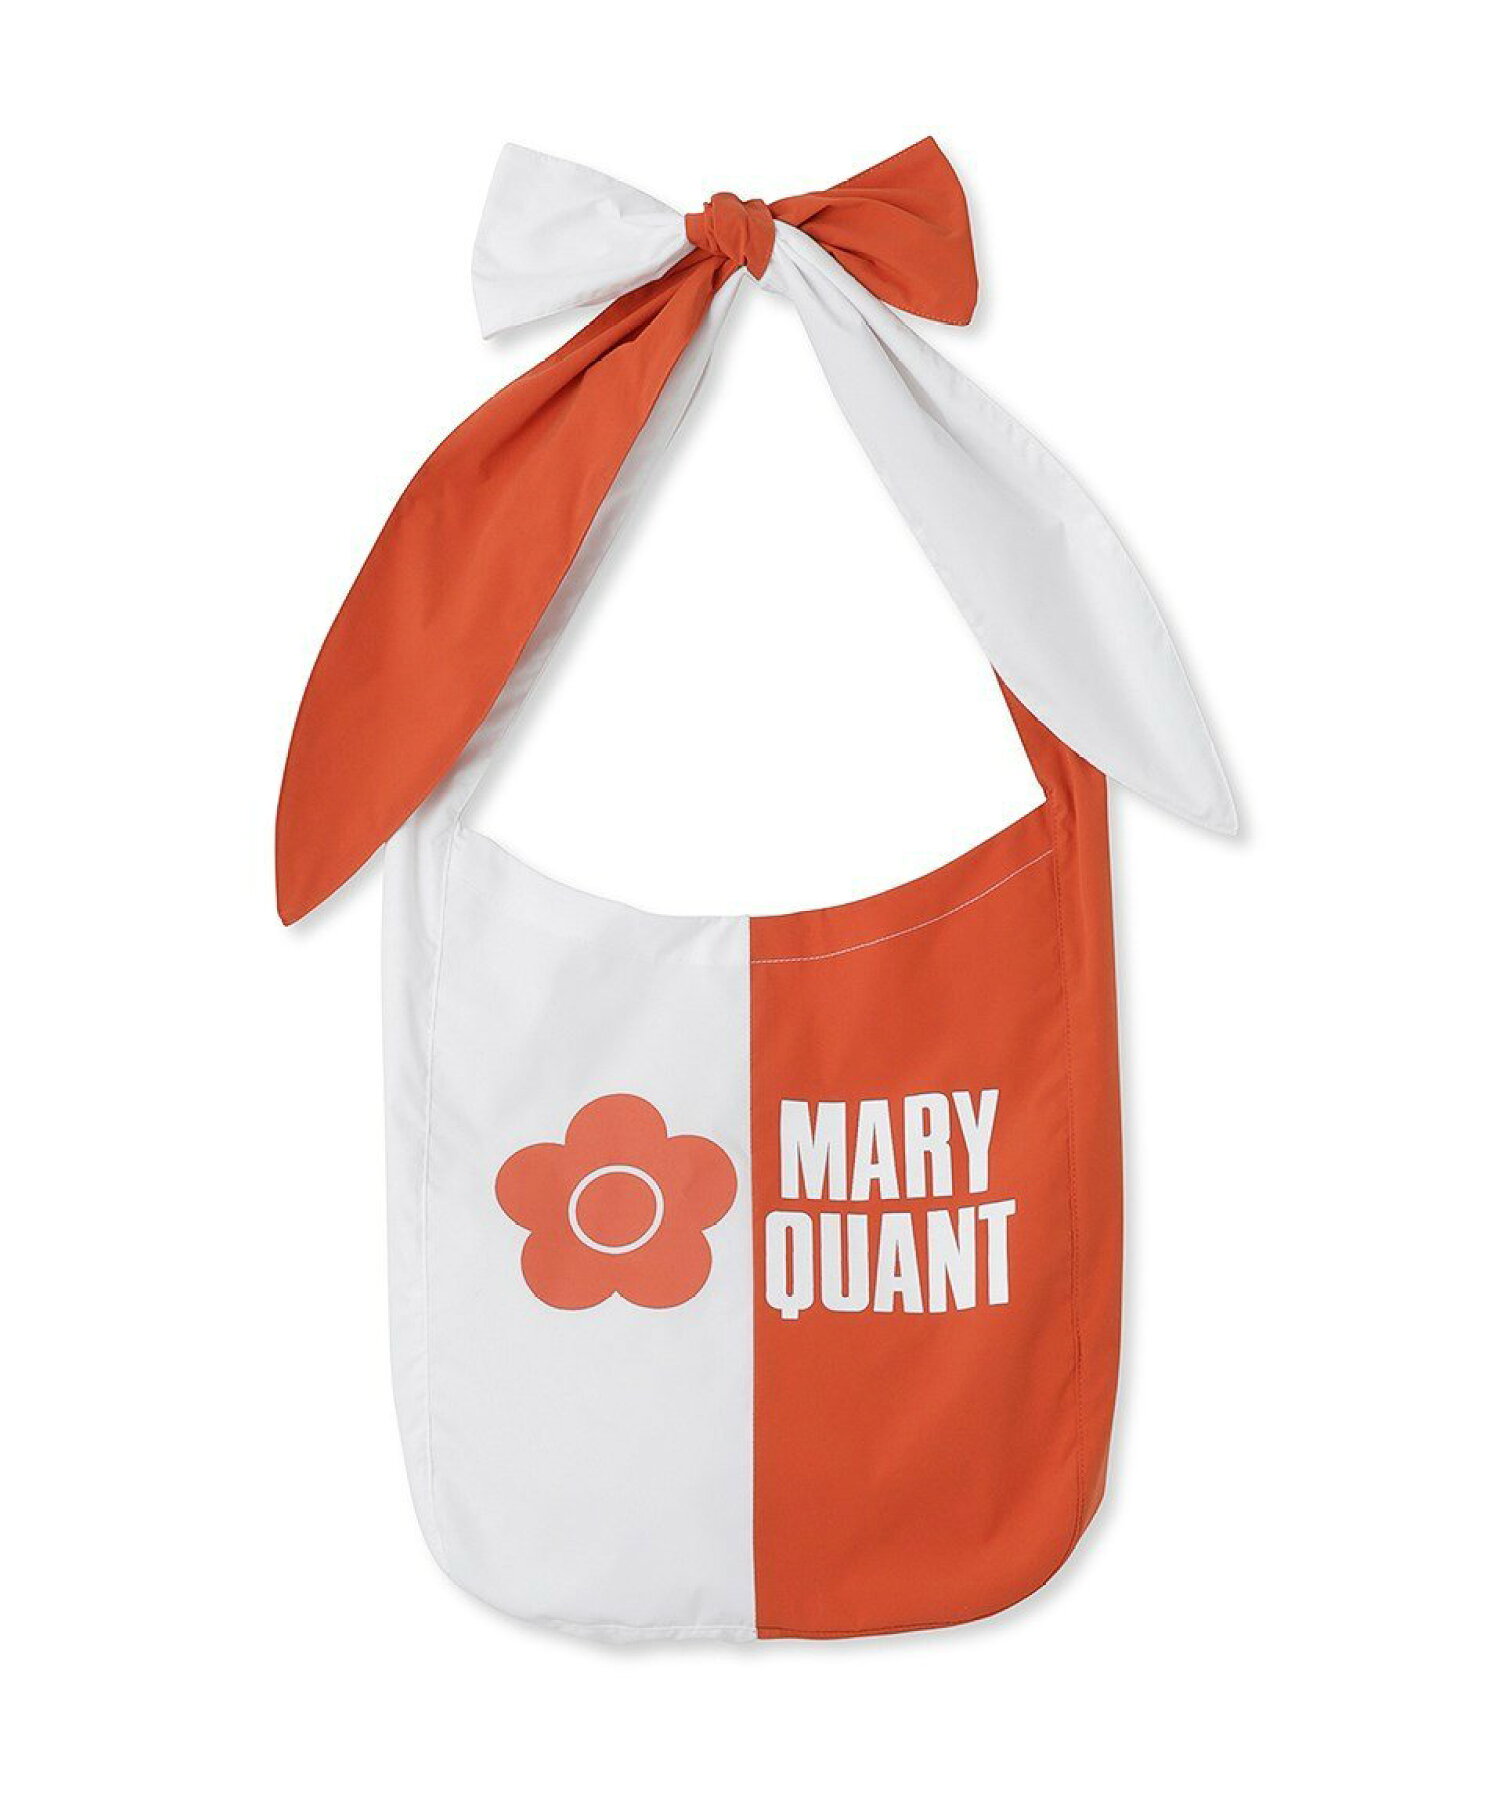 【LILY BROWN*MARY QUANT】エコバック